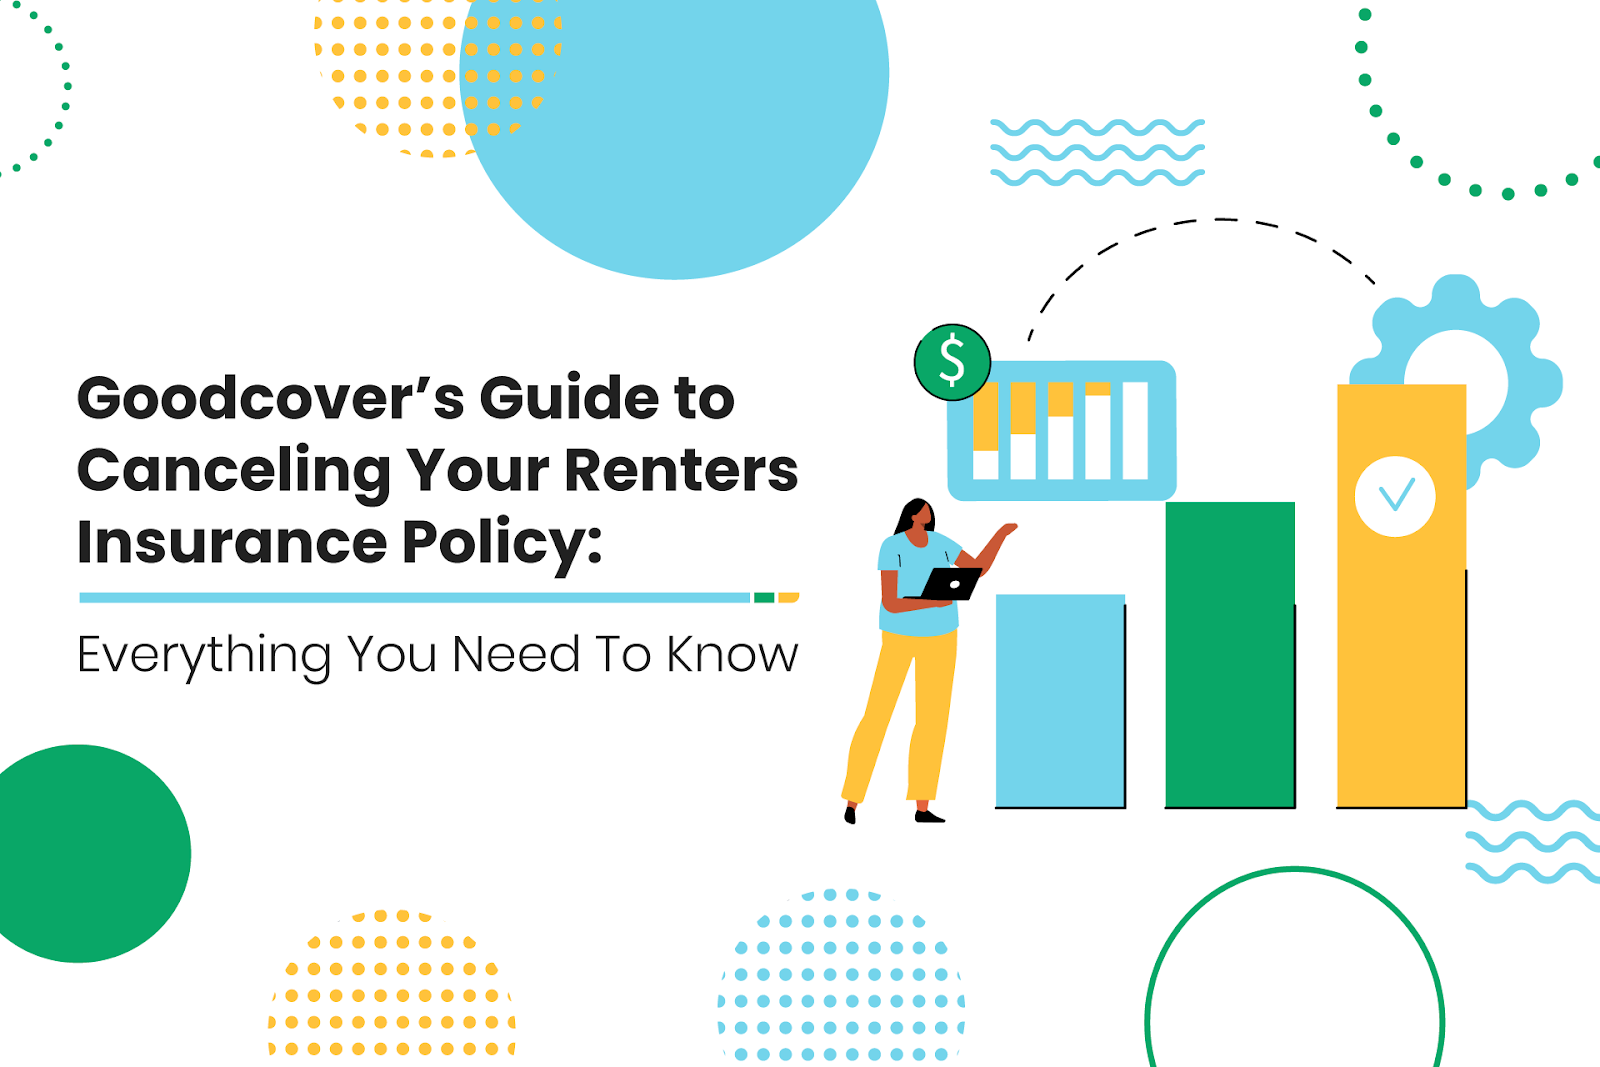 Goodcover’s Guide to Canceling A Renters Insurance Policy: Everything You Need To Know